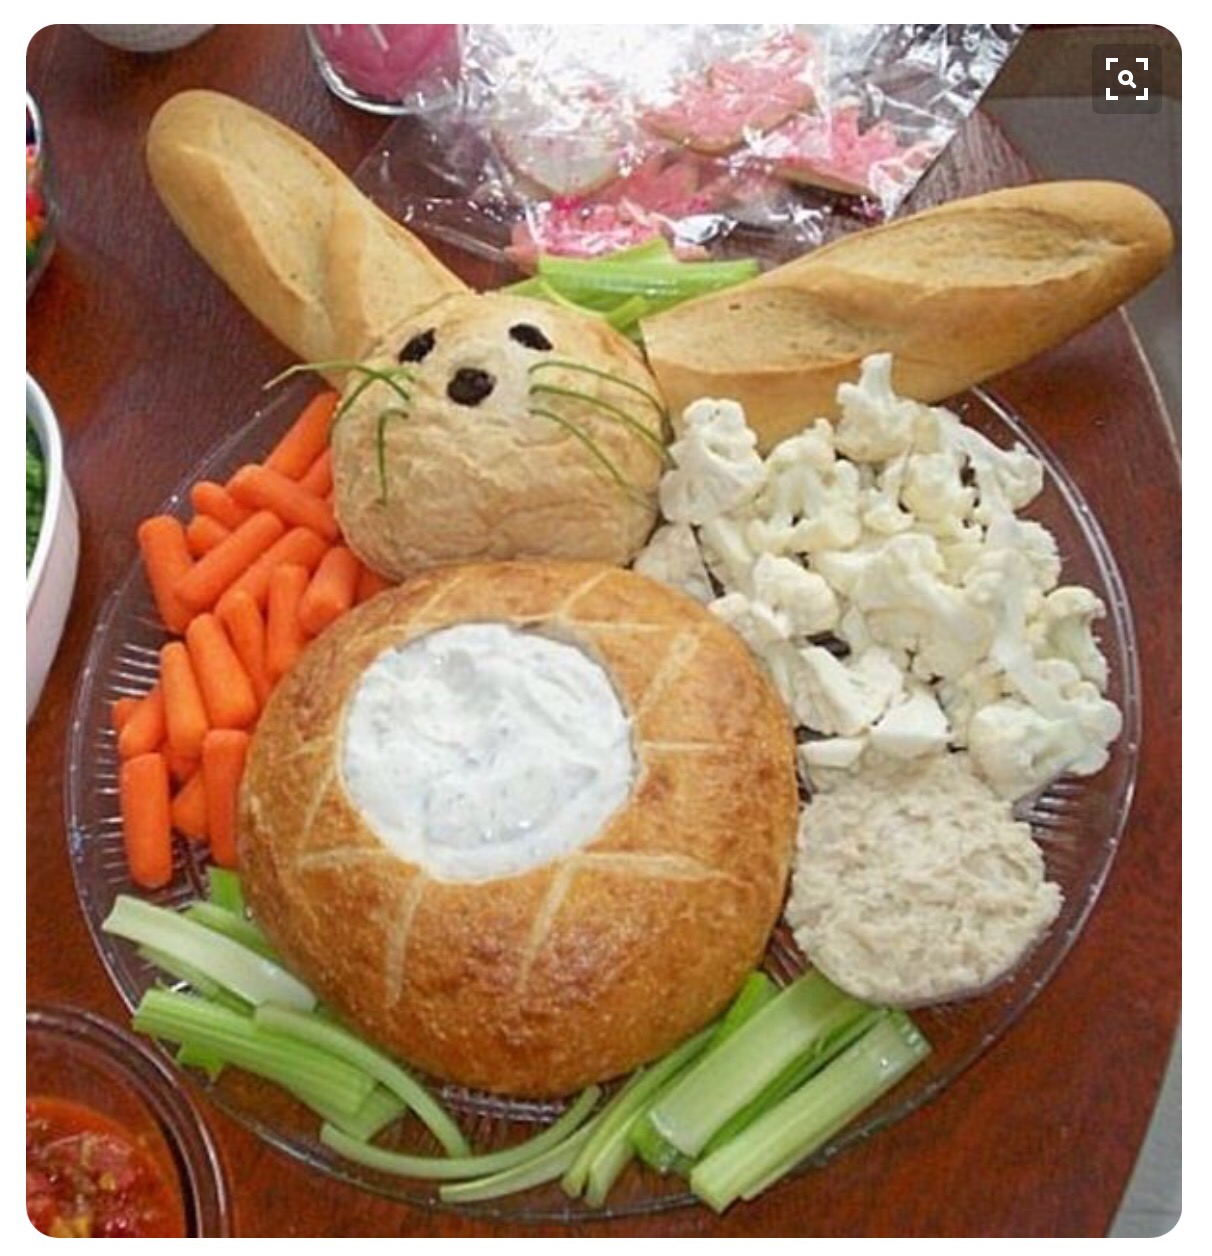 A dip filled bunny, surrounded by veggies? What's not to love?